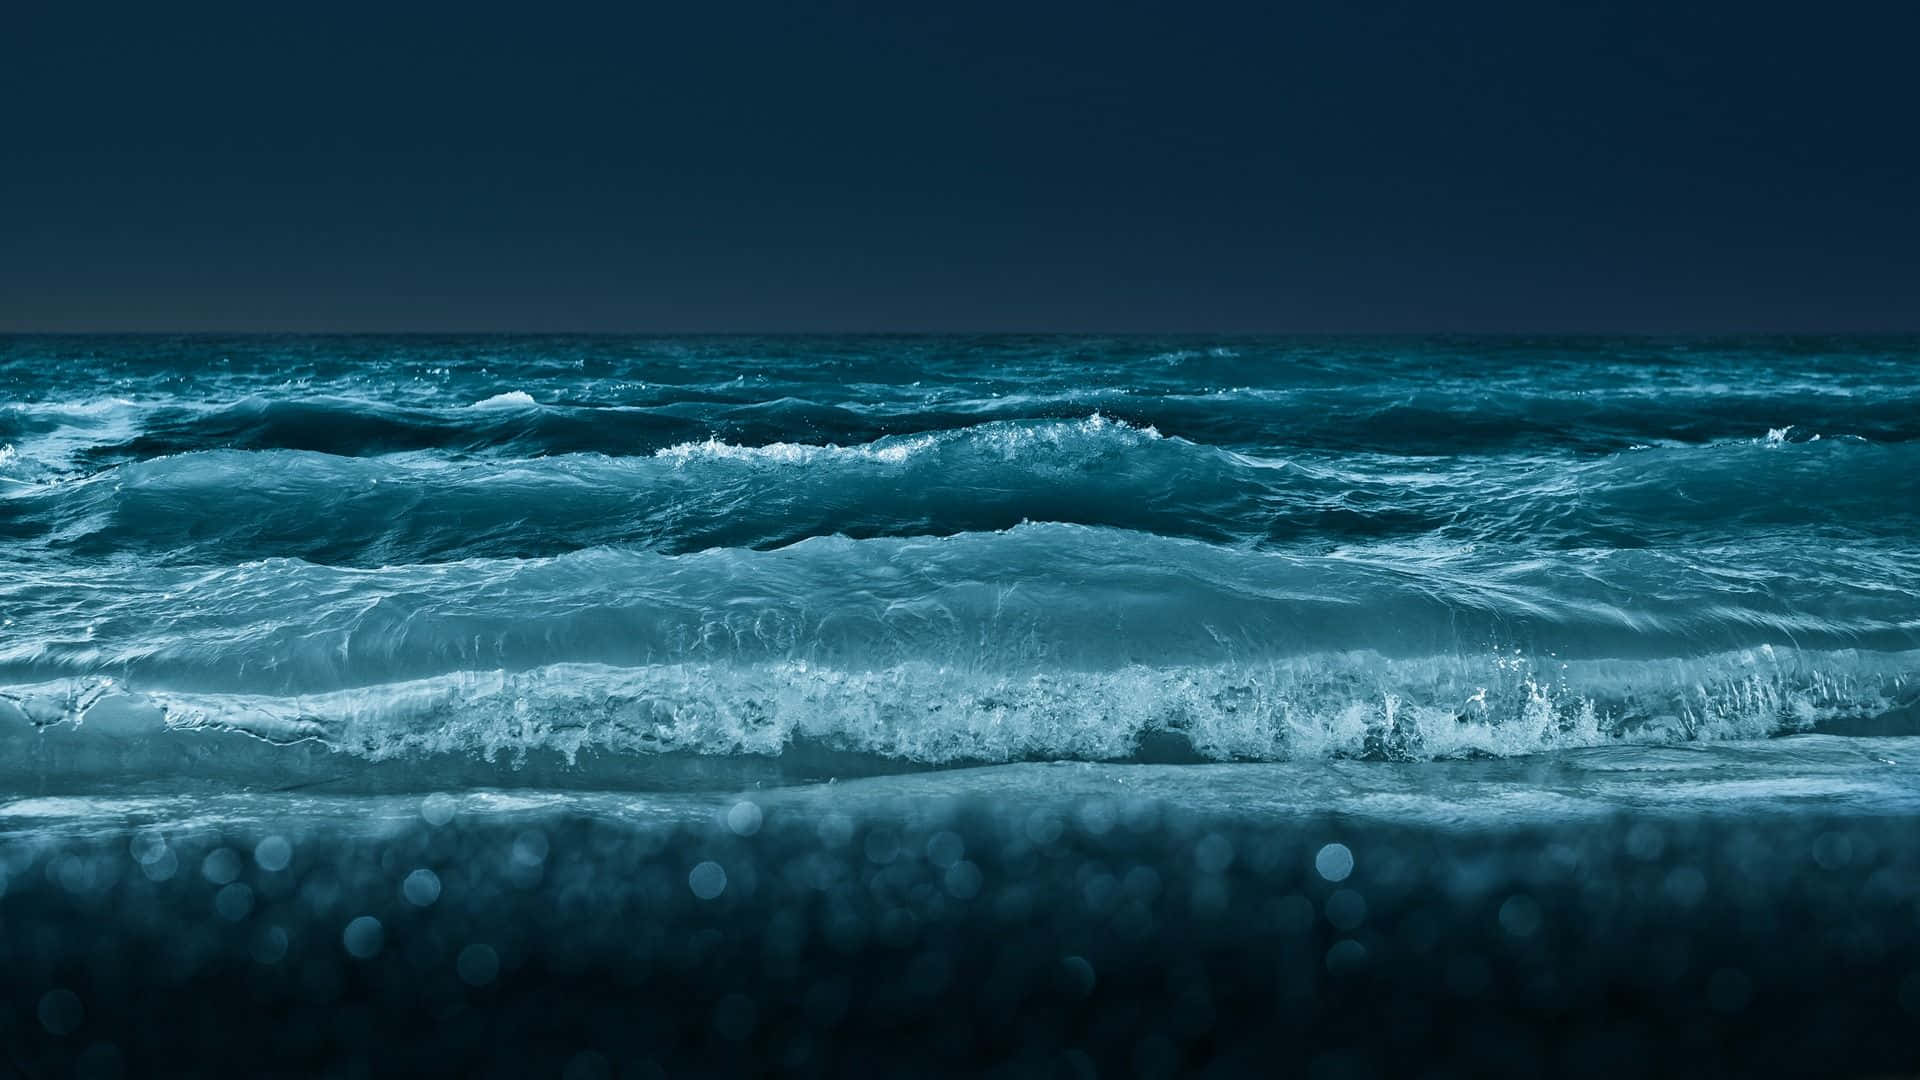 Majestic Ocean Waves at Twilight